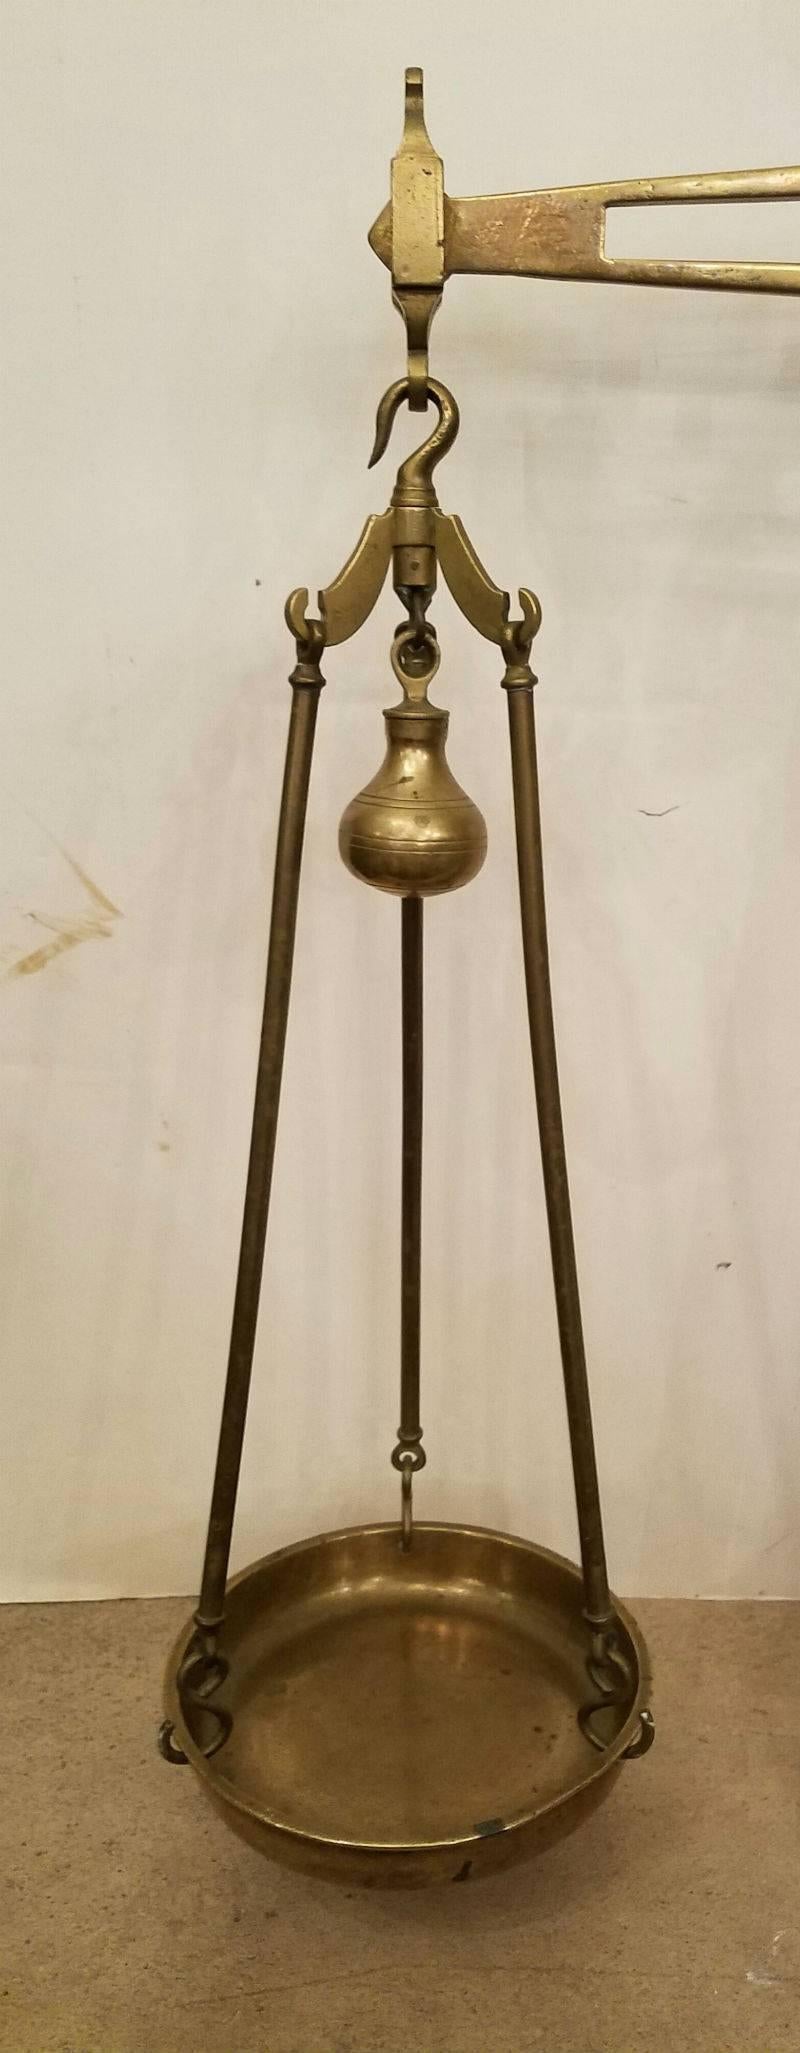 Brass and iron beam scale. Marked: 10 lb Class B and Berry & Warmington Limited, Liverpool & Manchester.